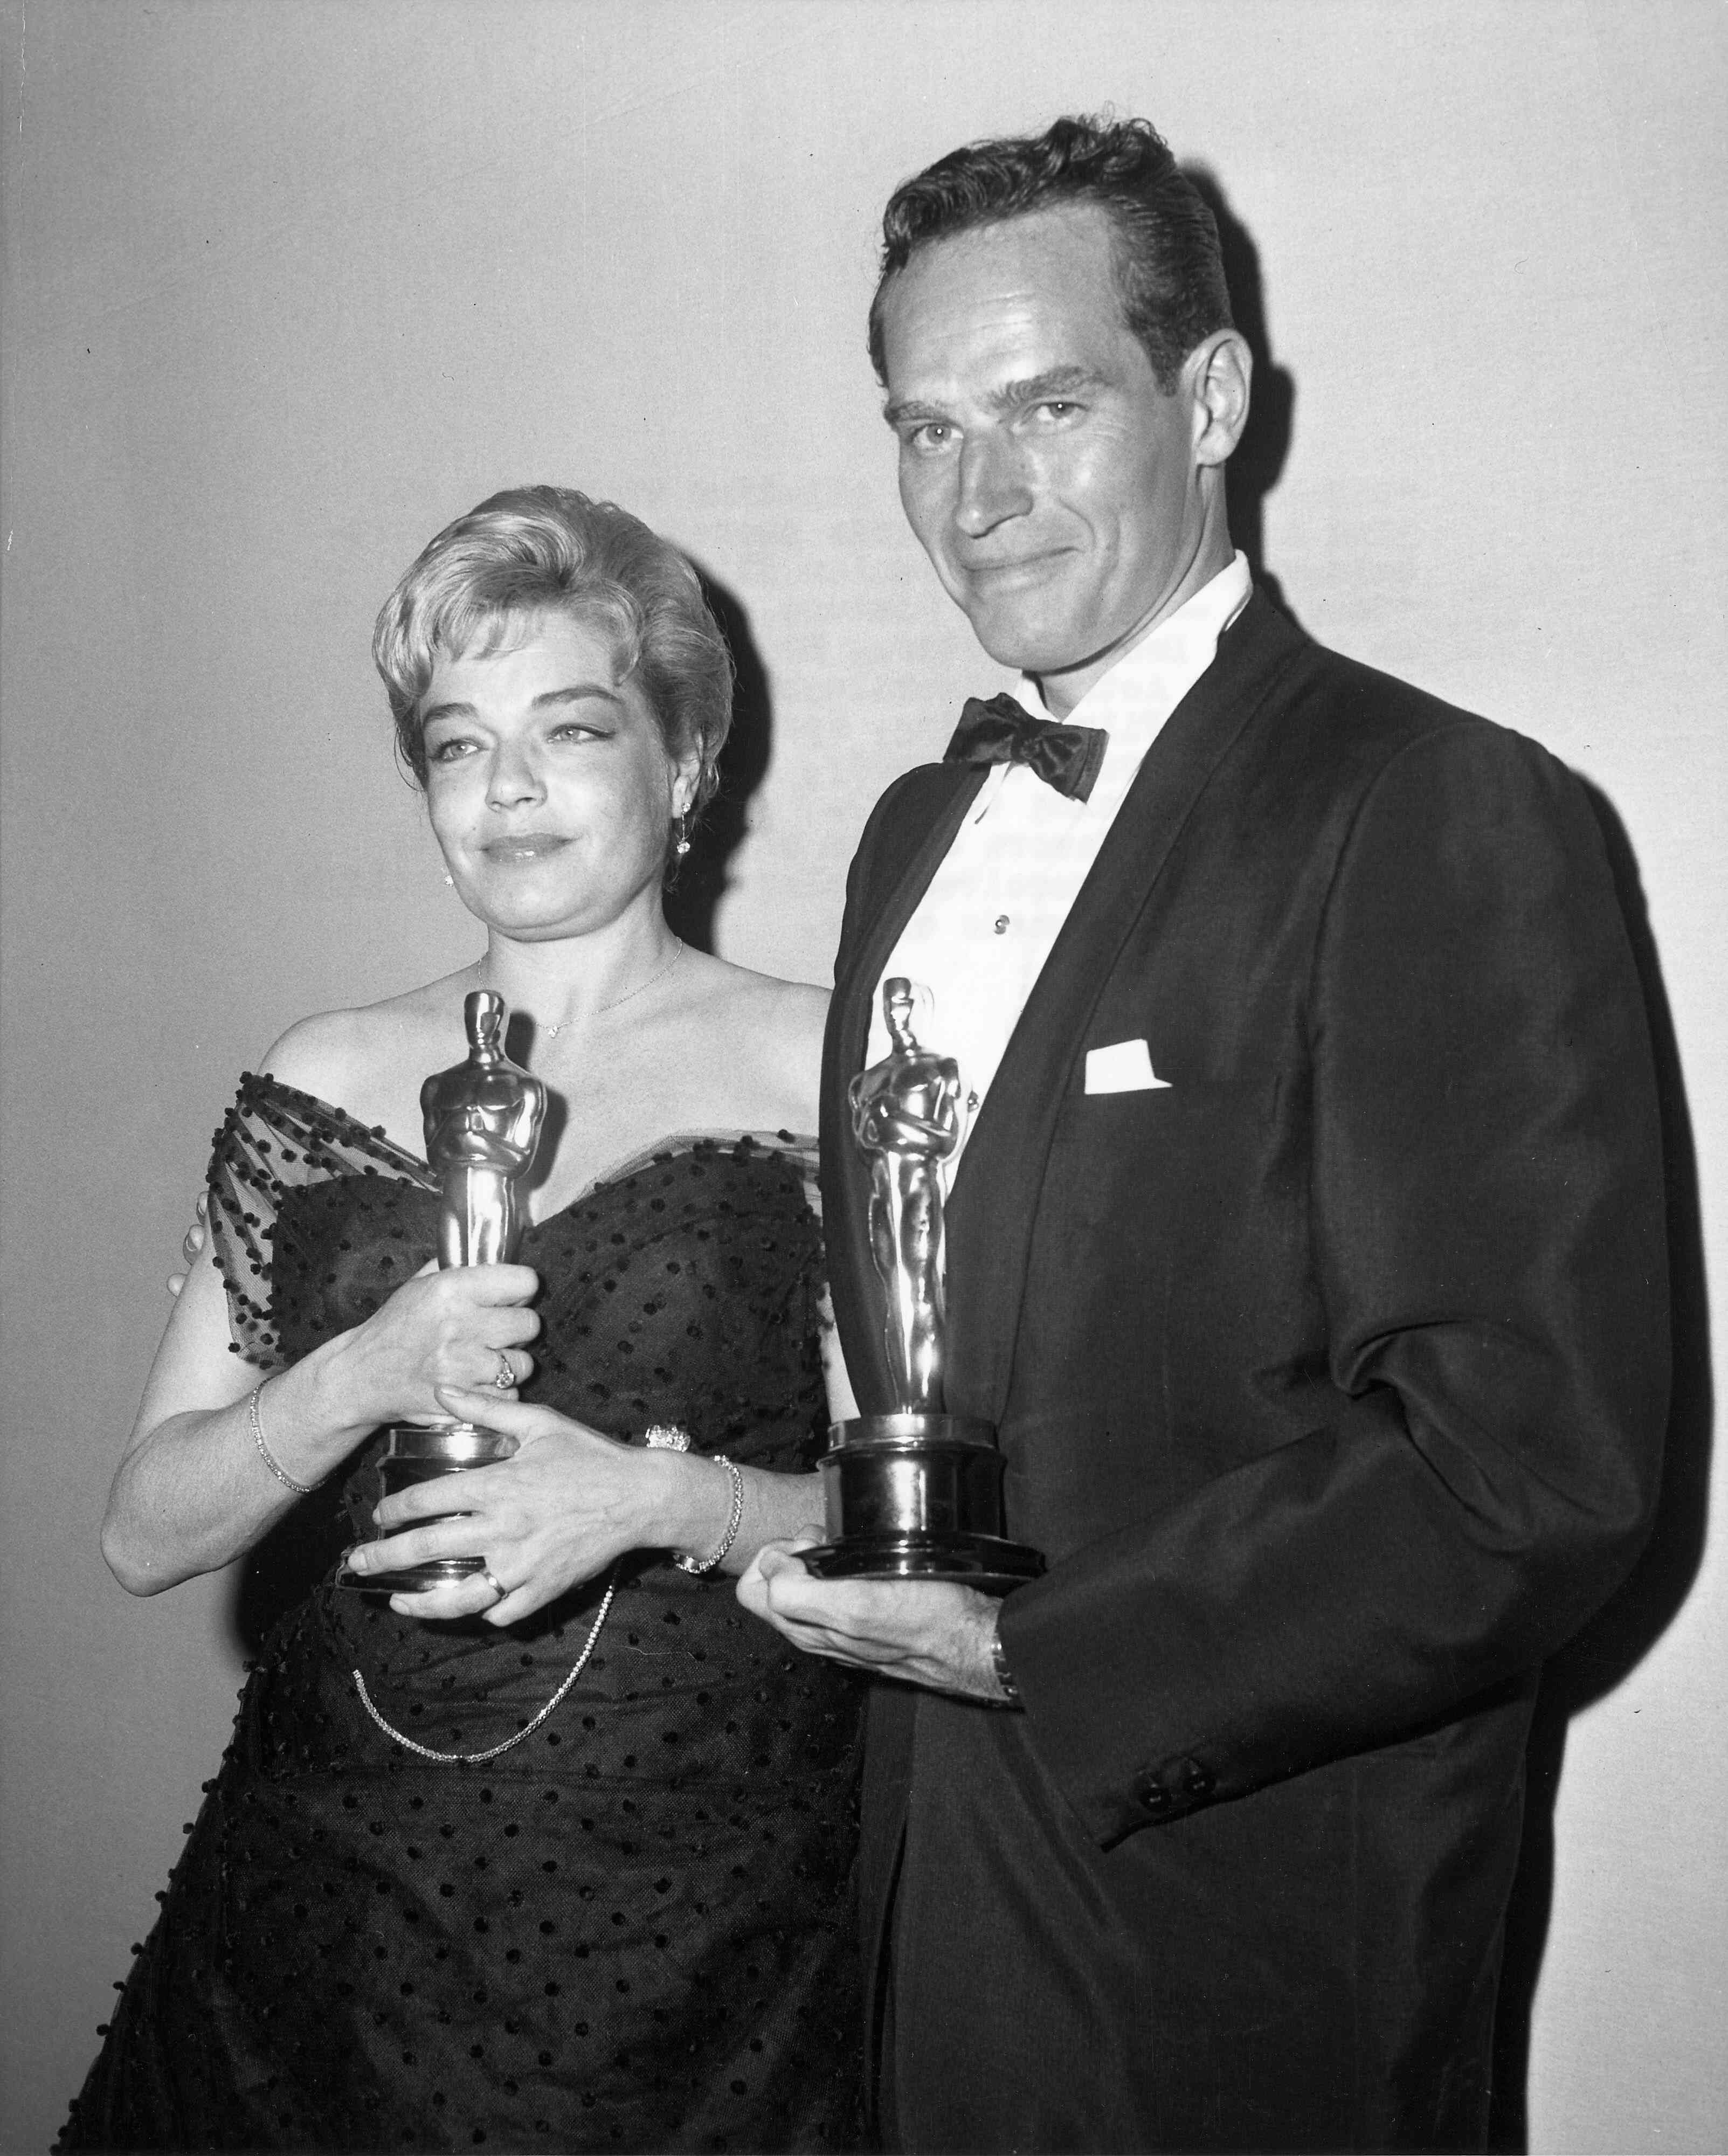 1960 | Oscars.org | Academy of Motion Picture Arts and Sciences3206 x 4000